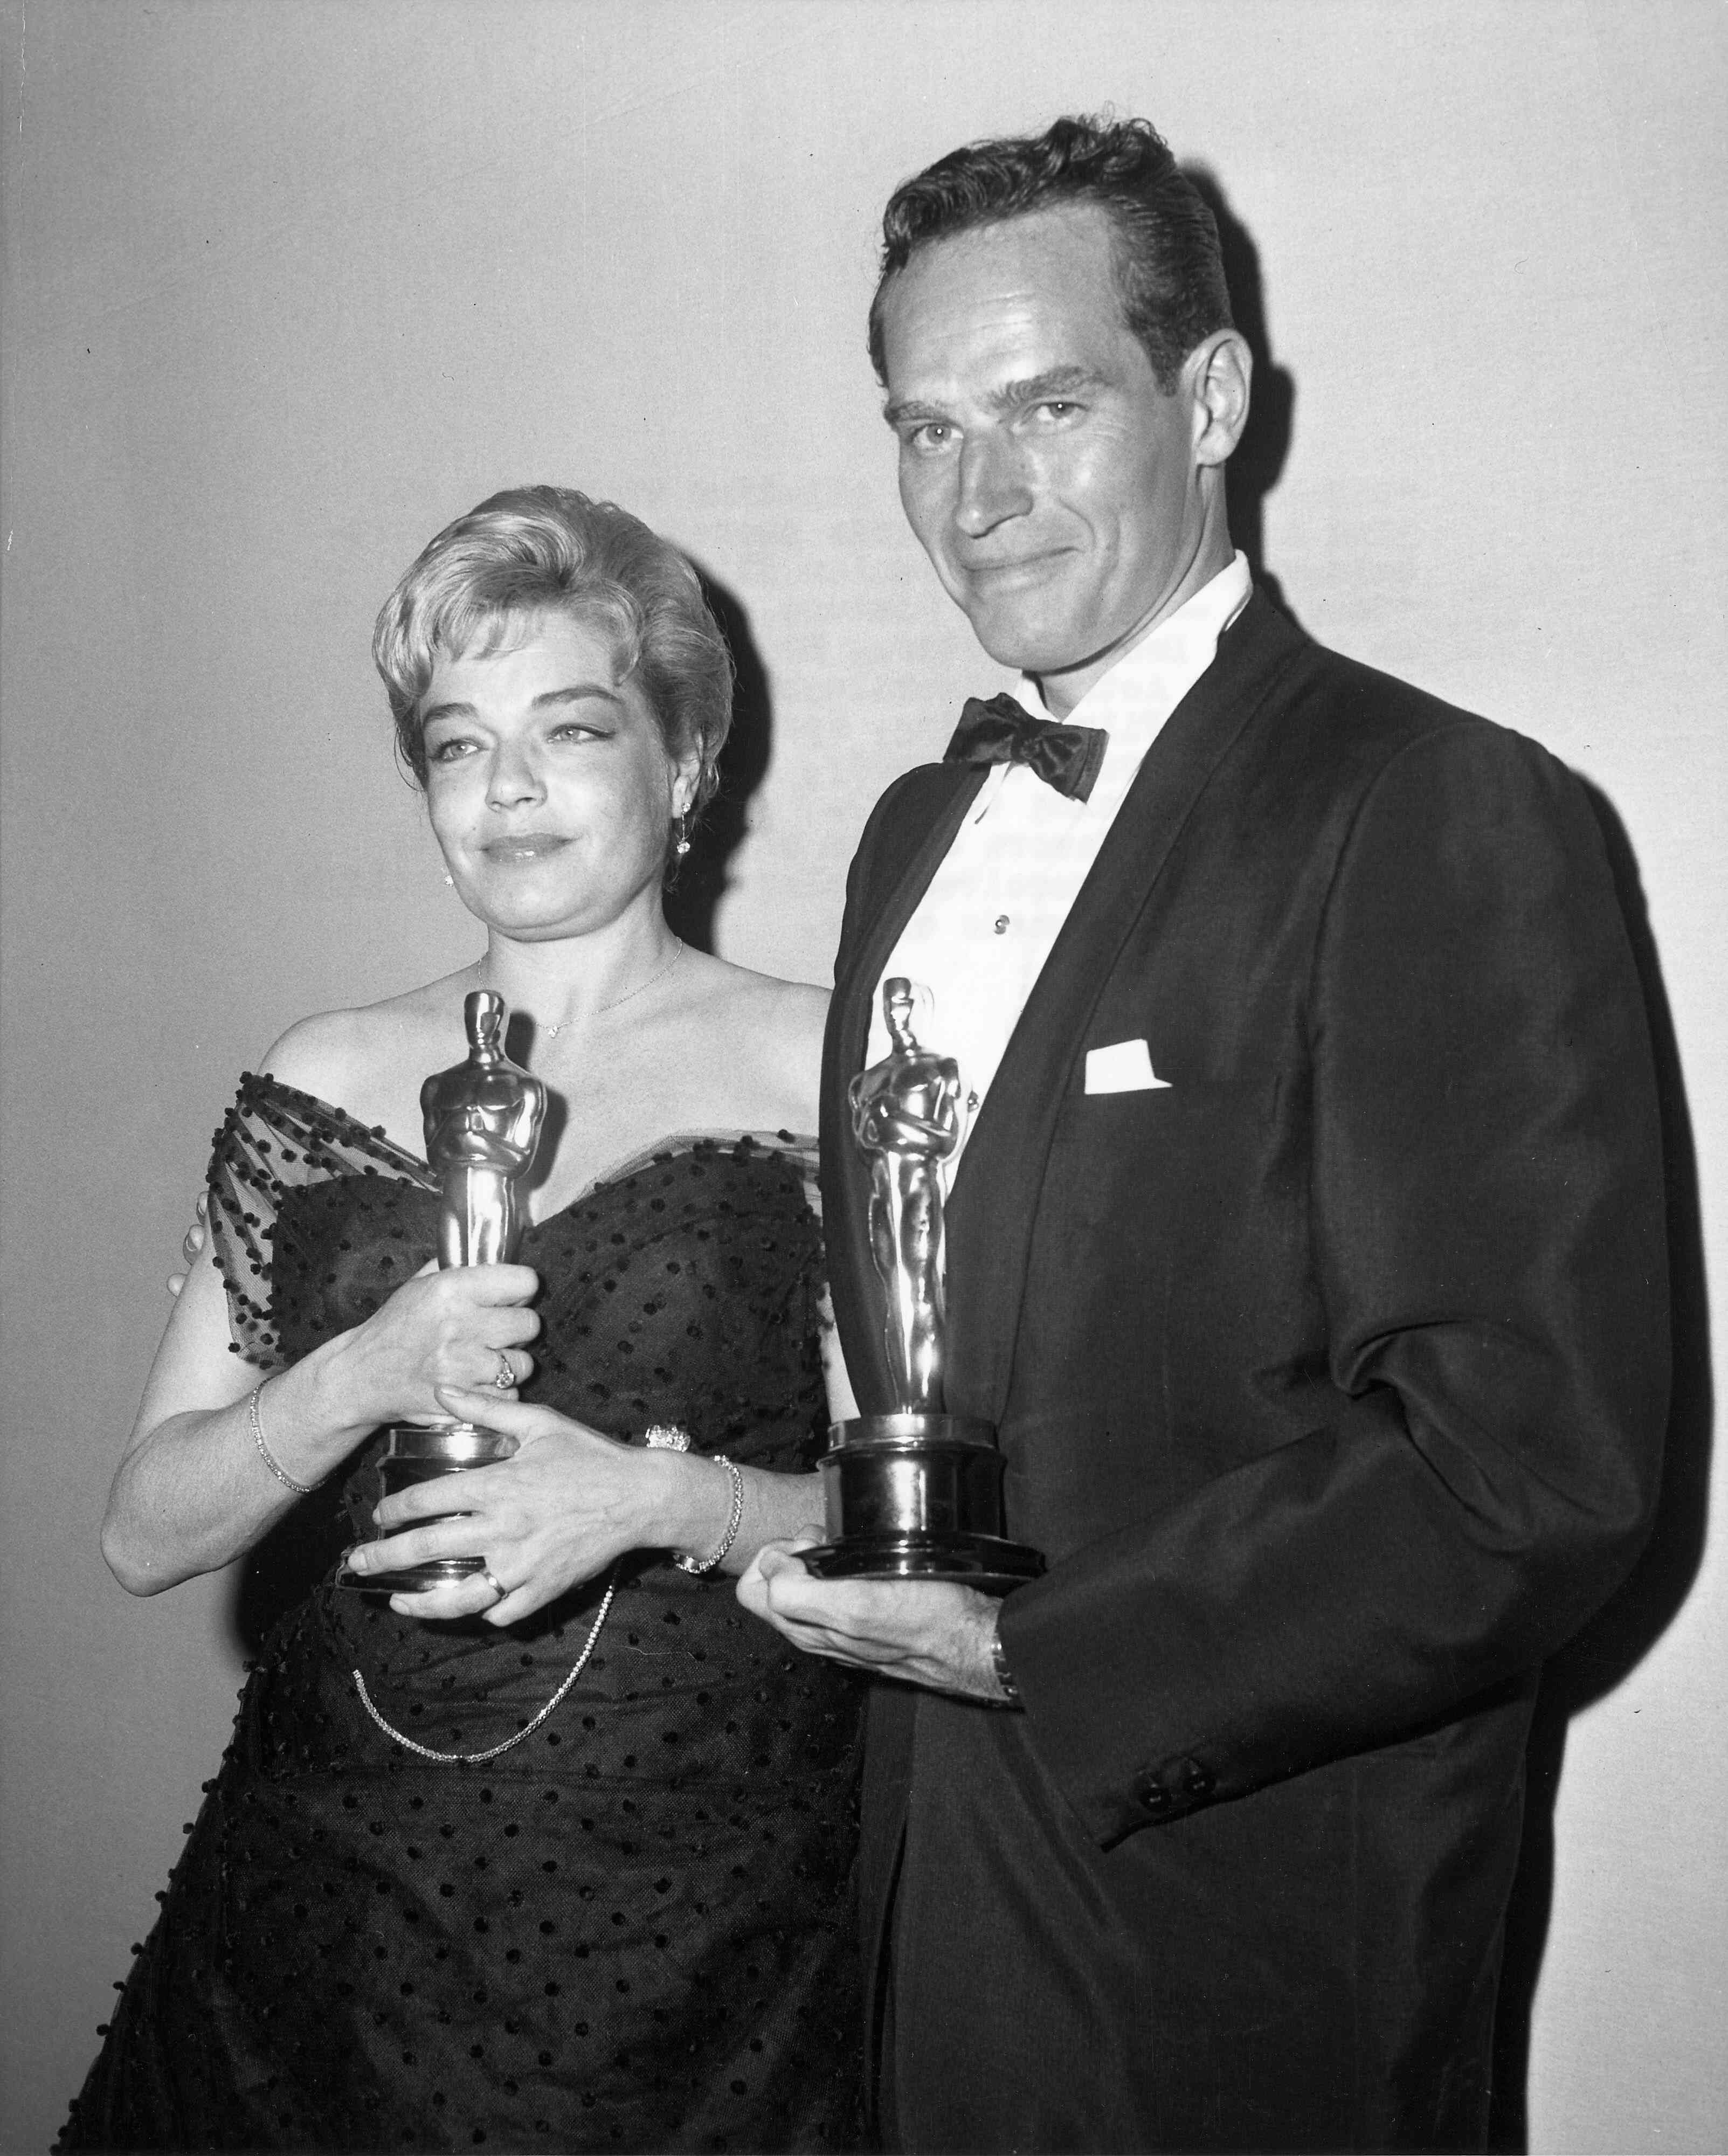 1960 | Oscars.org | Academy of Motion Picture Arts and Sciences3206 x 4000